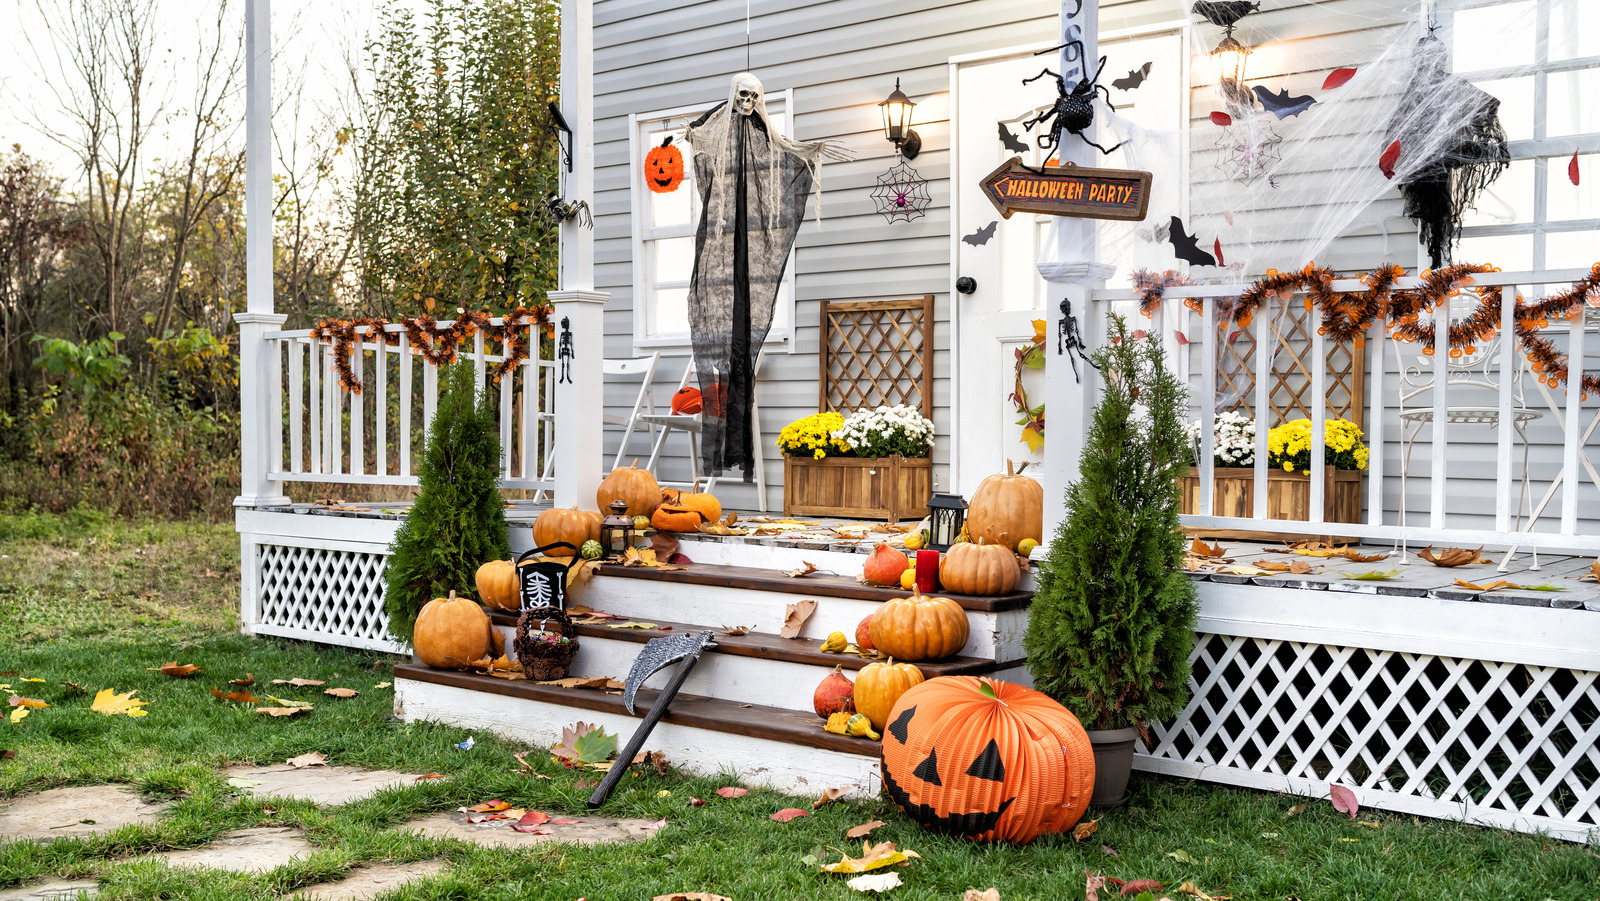 Transform Your Cheap Plastic Pumpkins Into The Perfect Fall Porch